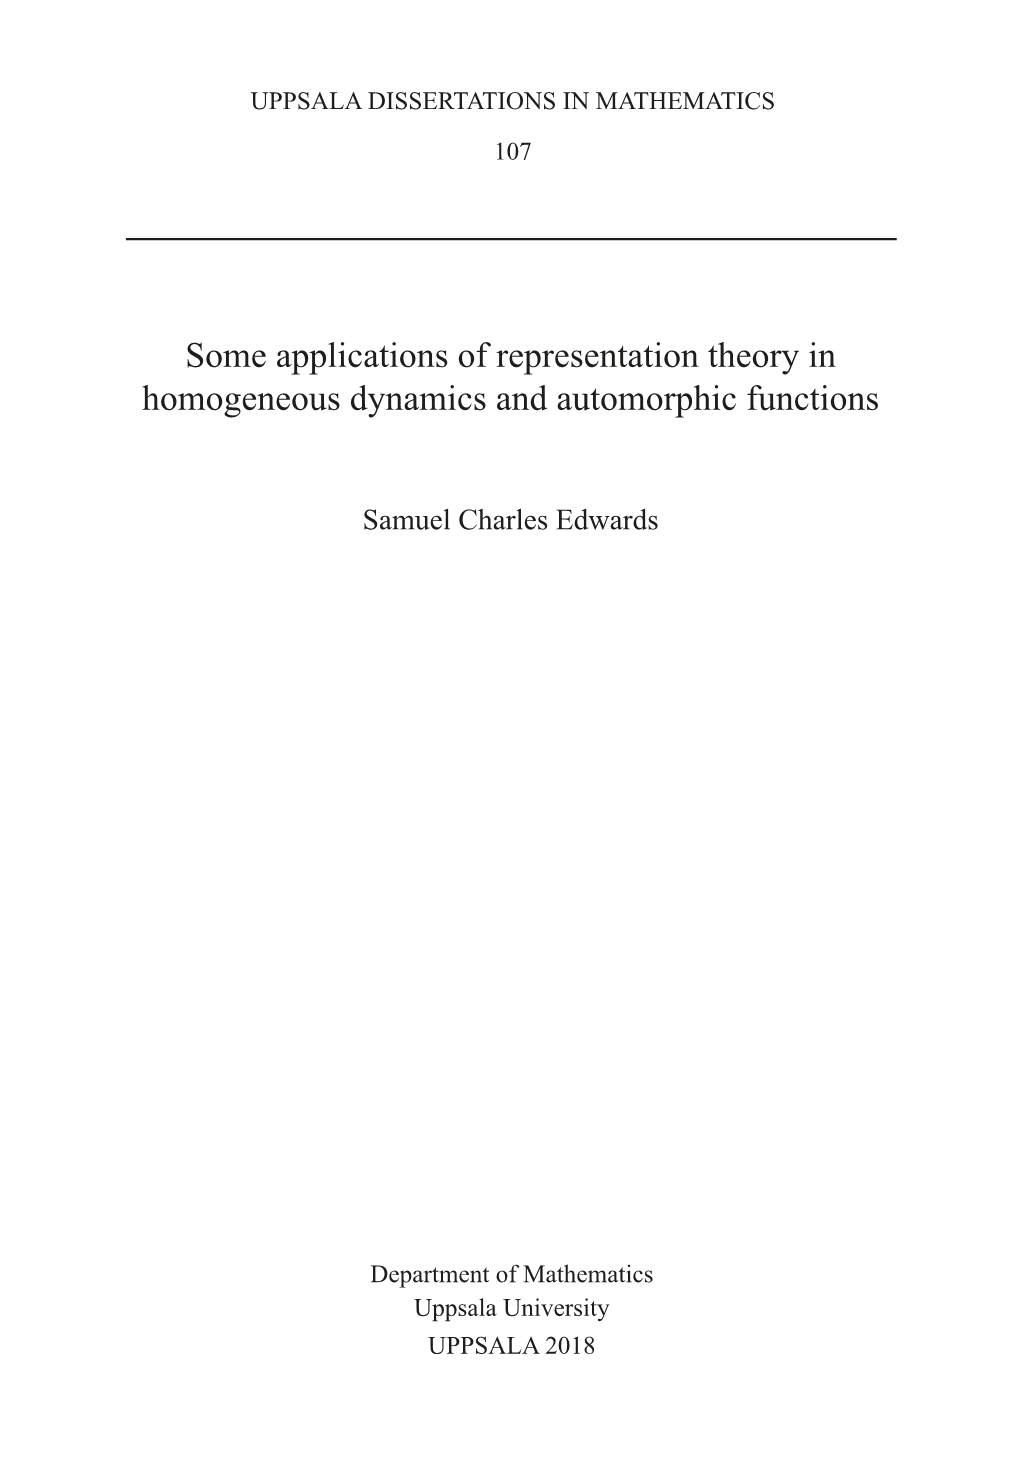 Some Applications of Representation Theory in Homogeneous Dynamics and Automorphic Functions